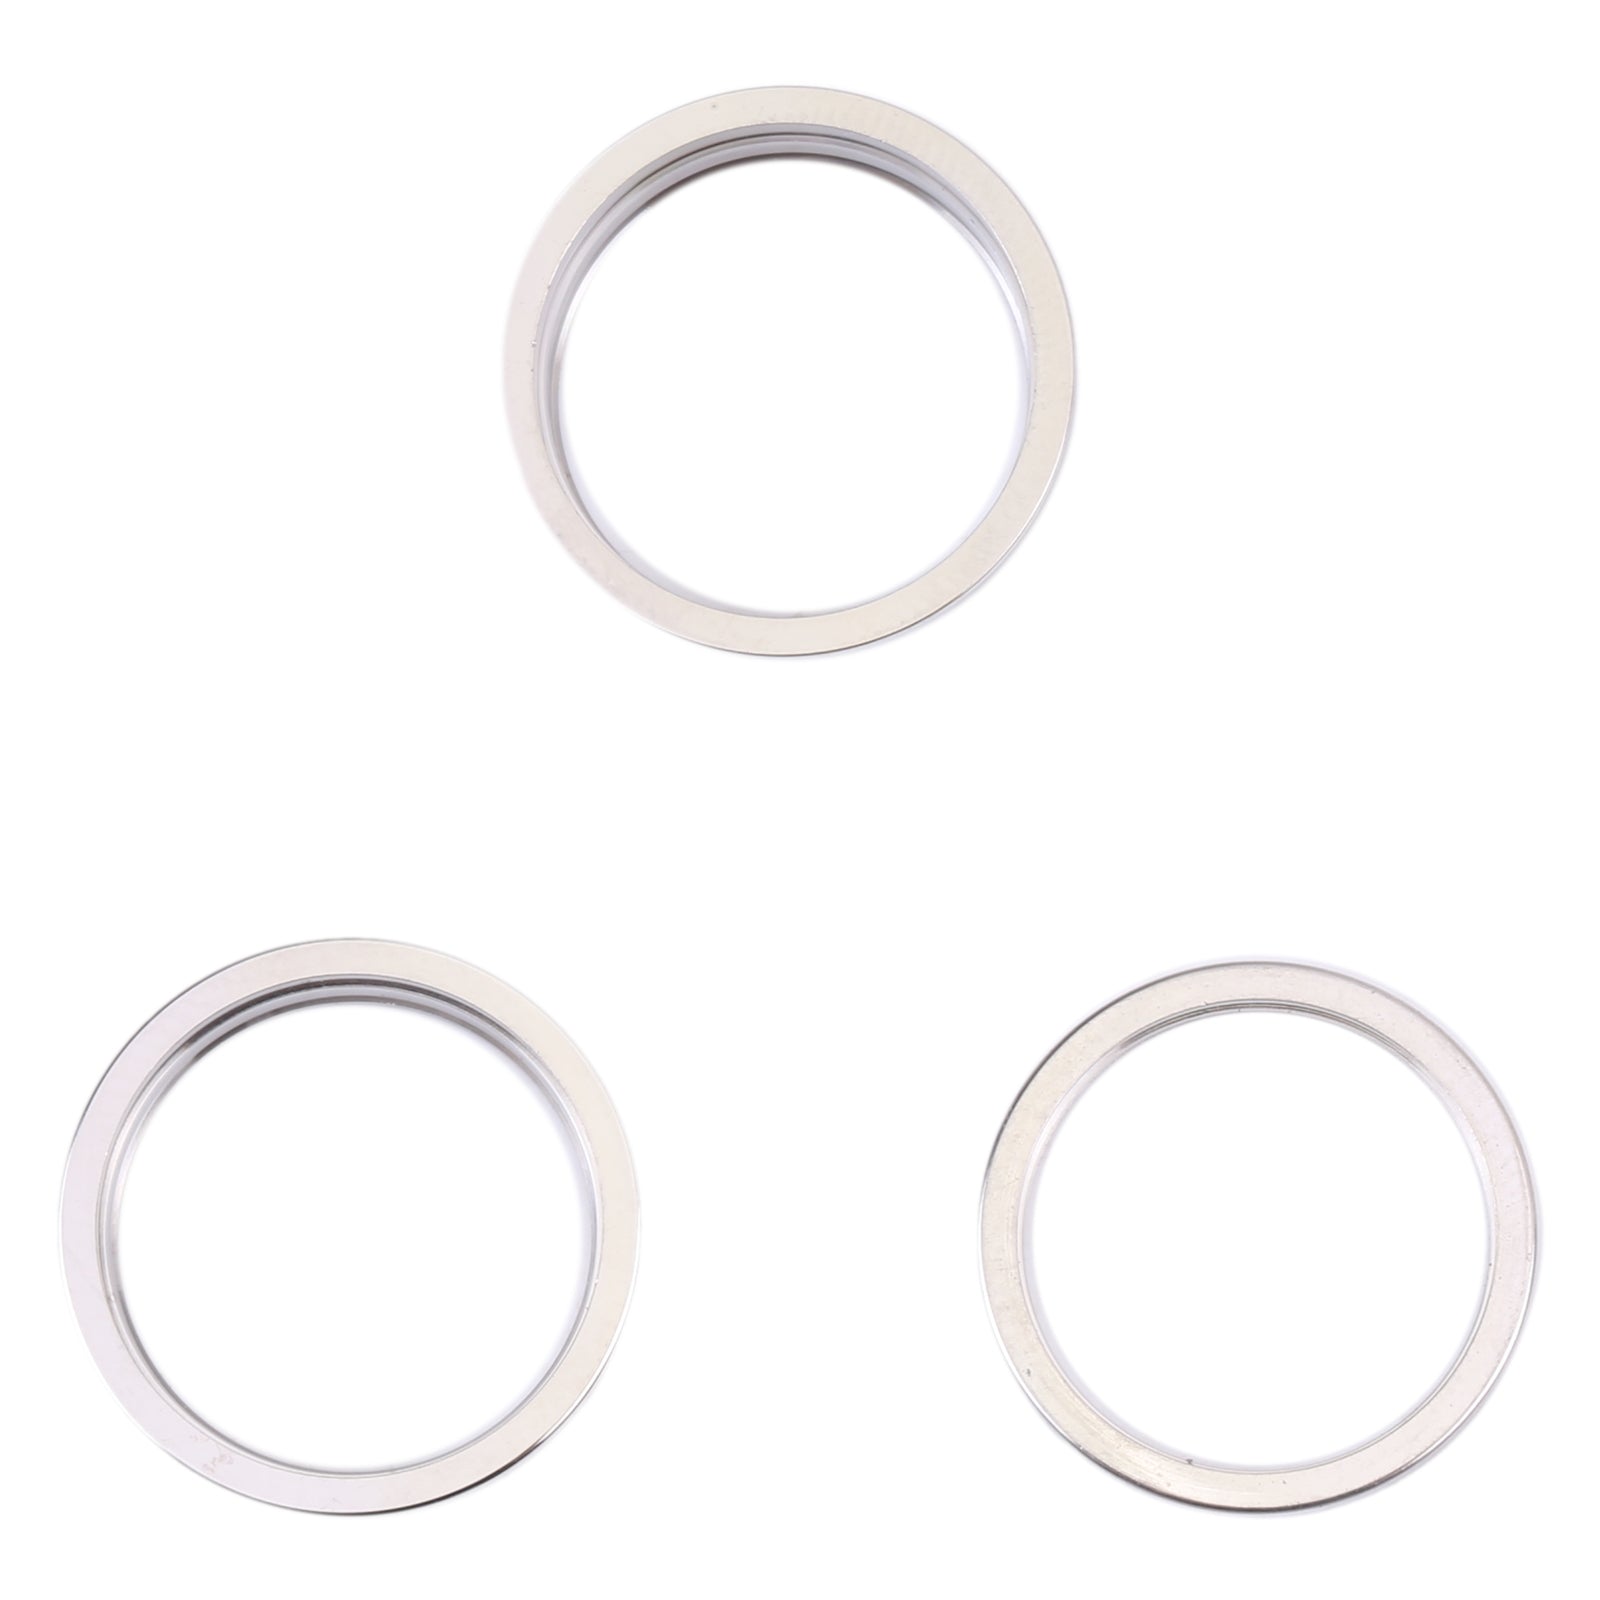 Rings for Rear Camera Lens Apple iPhone 14 Pro Max Silver